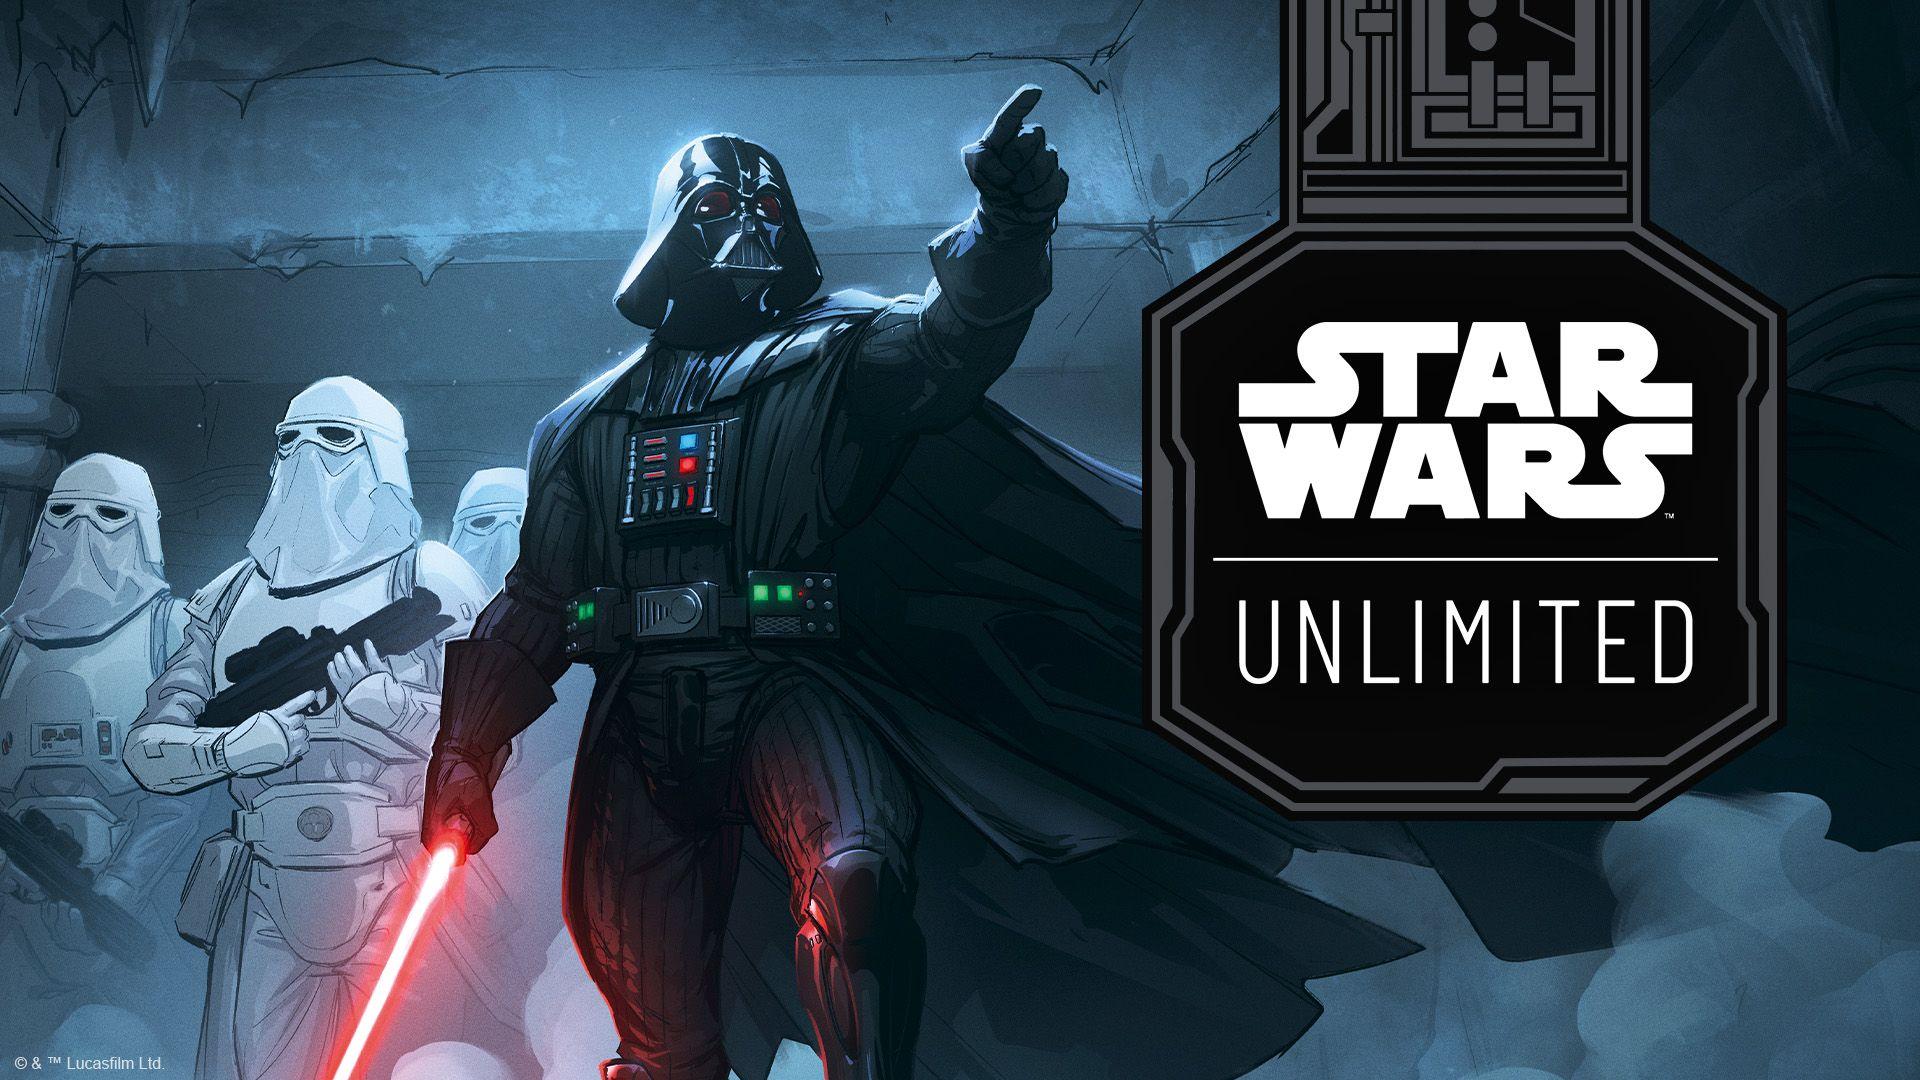 Star Wars Unlimited Double Sleeving Pack: Darth Vader (New Arrival)